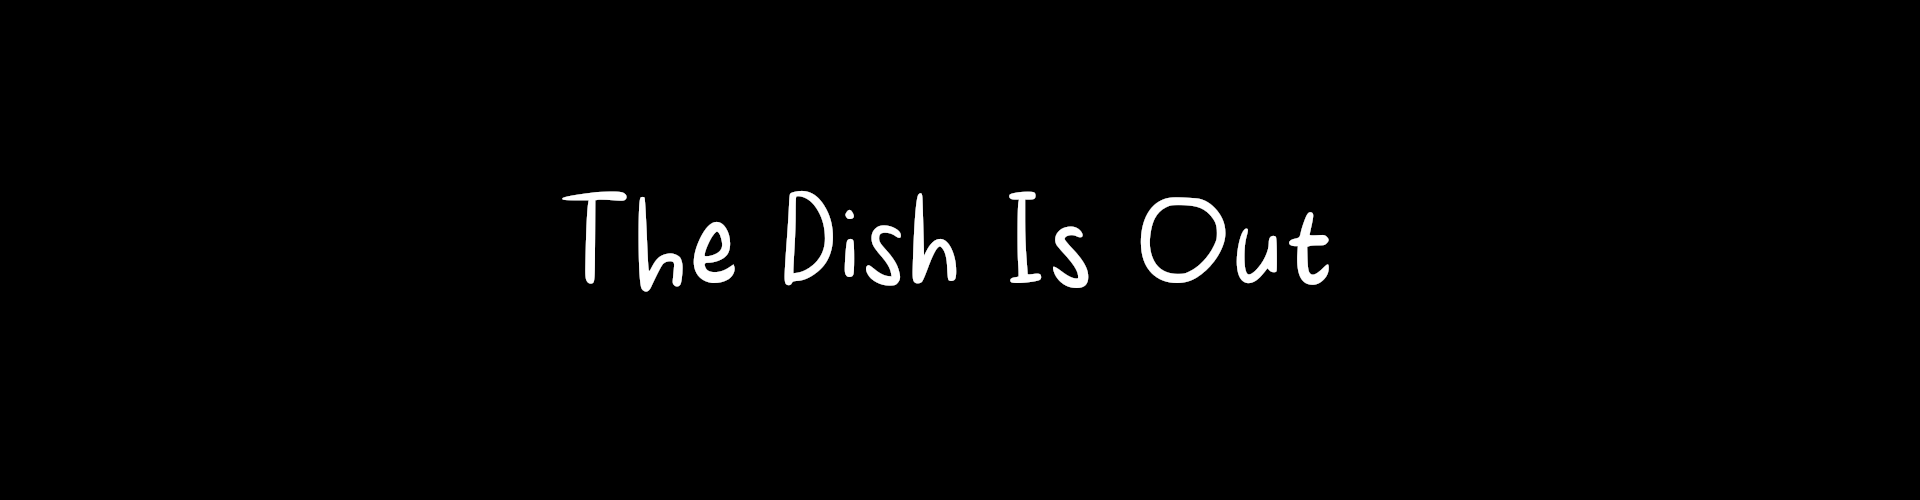 The Dish Is Out